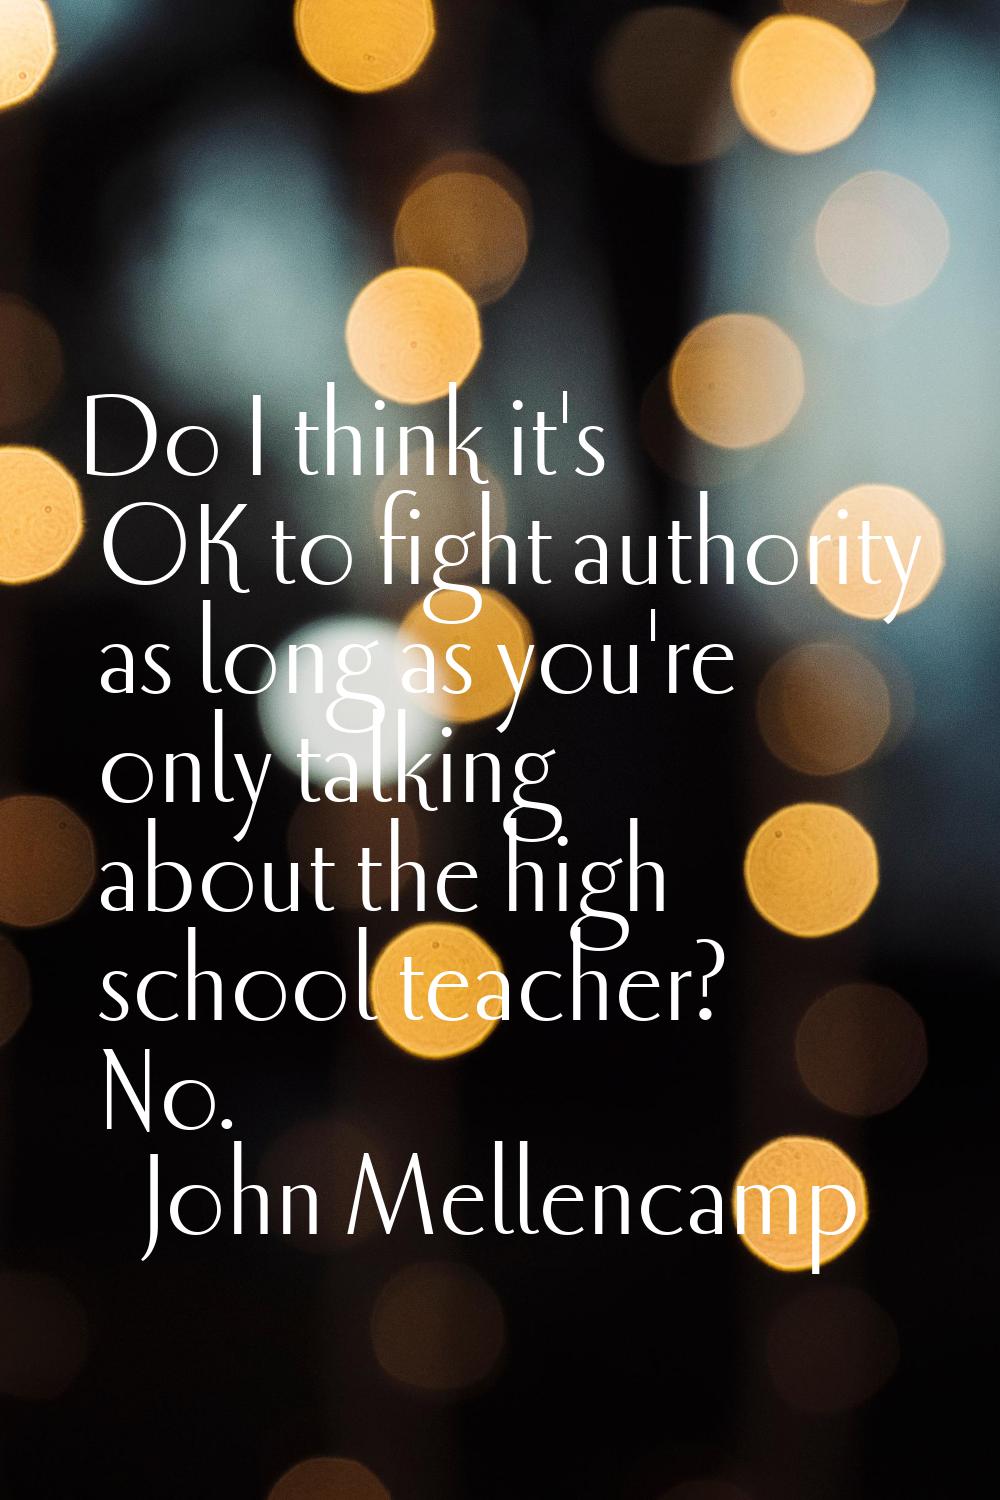 Do I think it's OK to fight authority as long as you're only talking about the high school teacher?